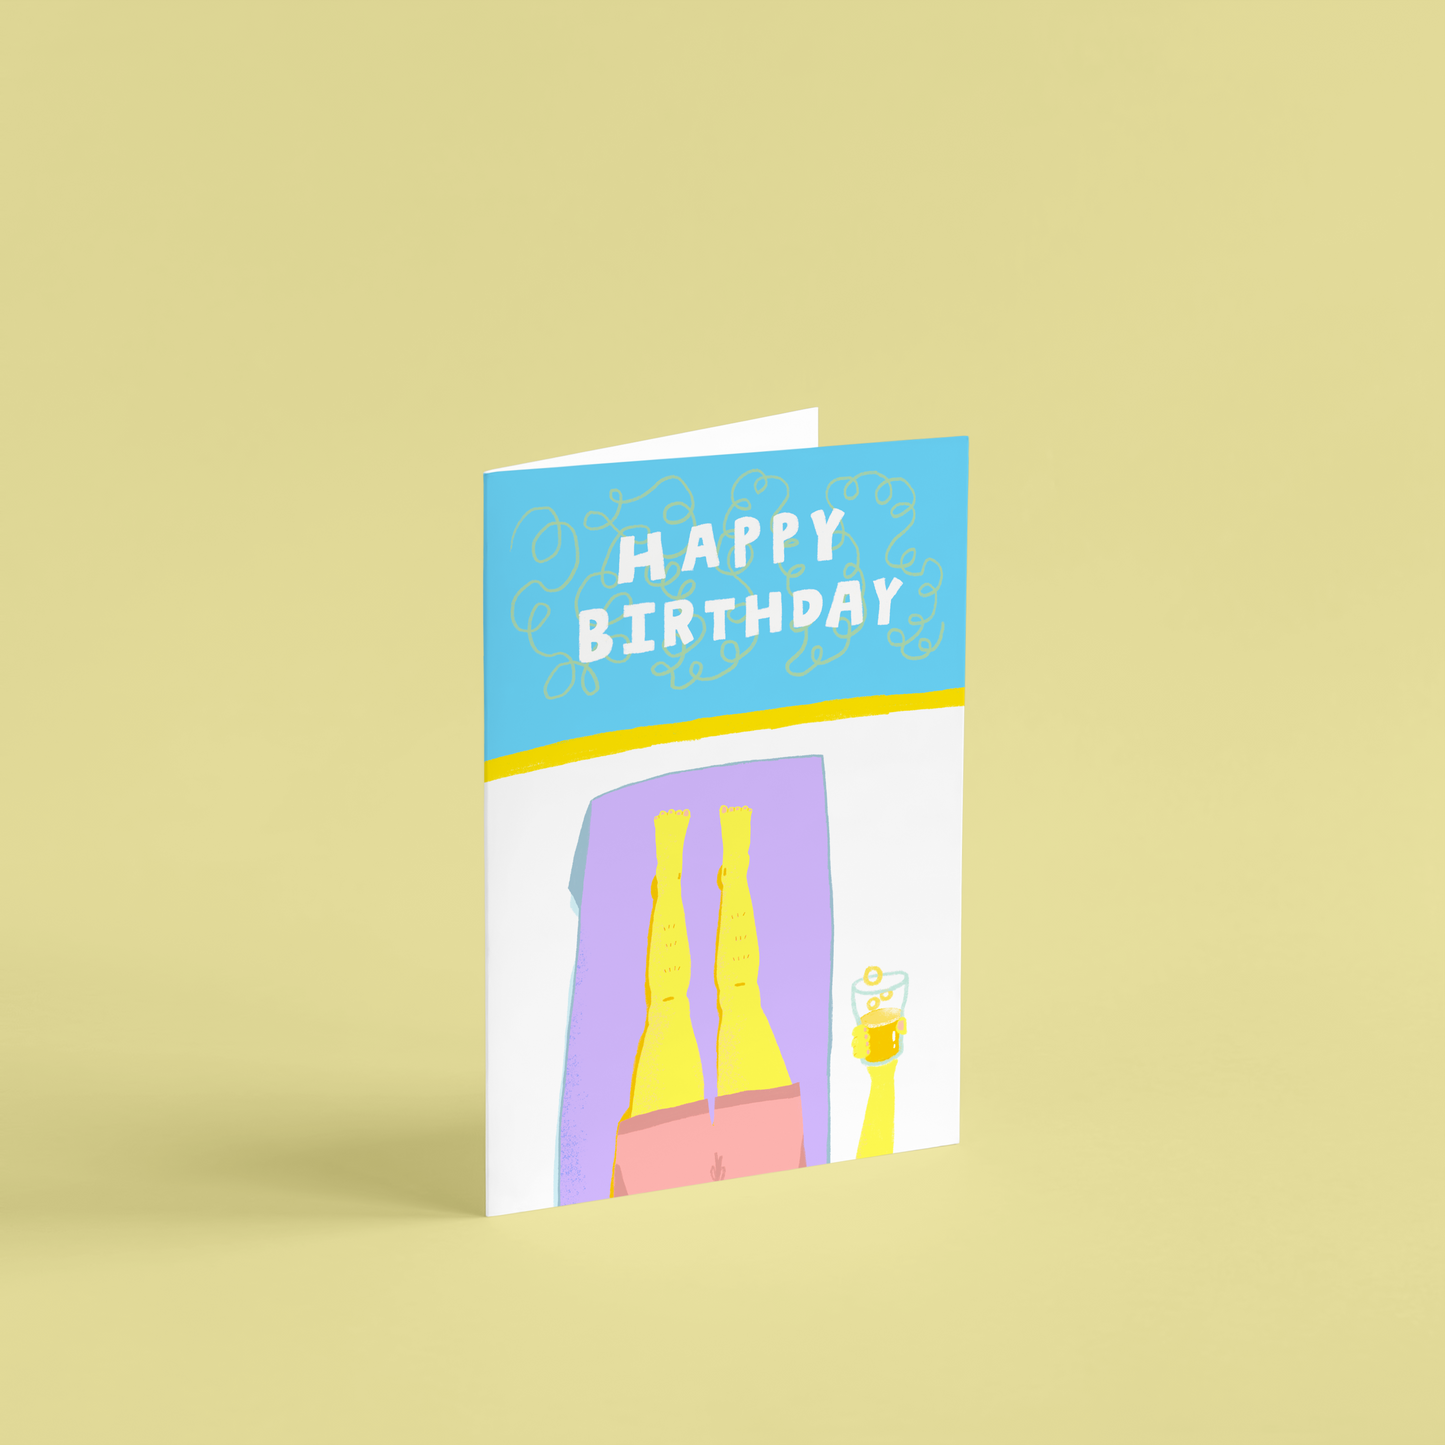 Man Drinking Beer By the Pool Birthday Greeting Card